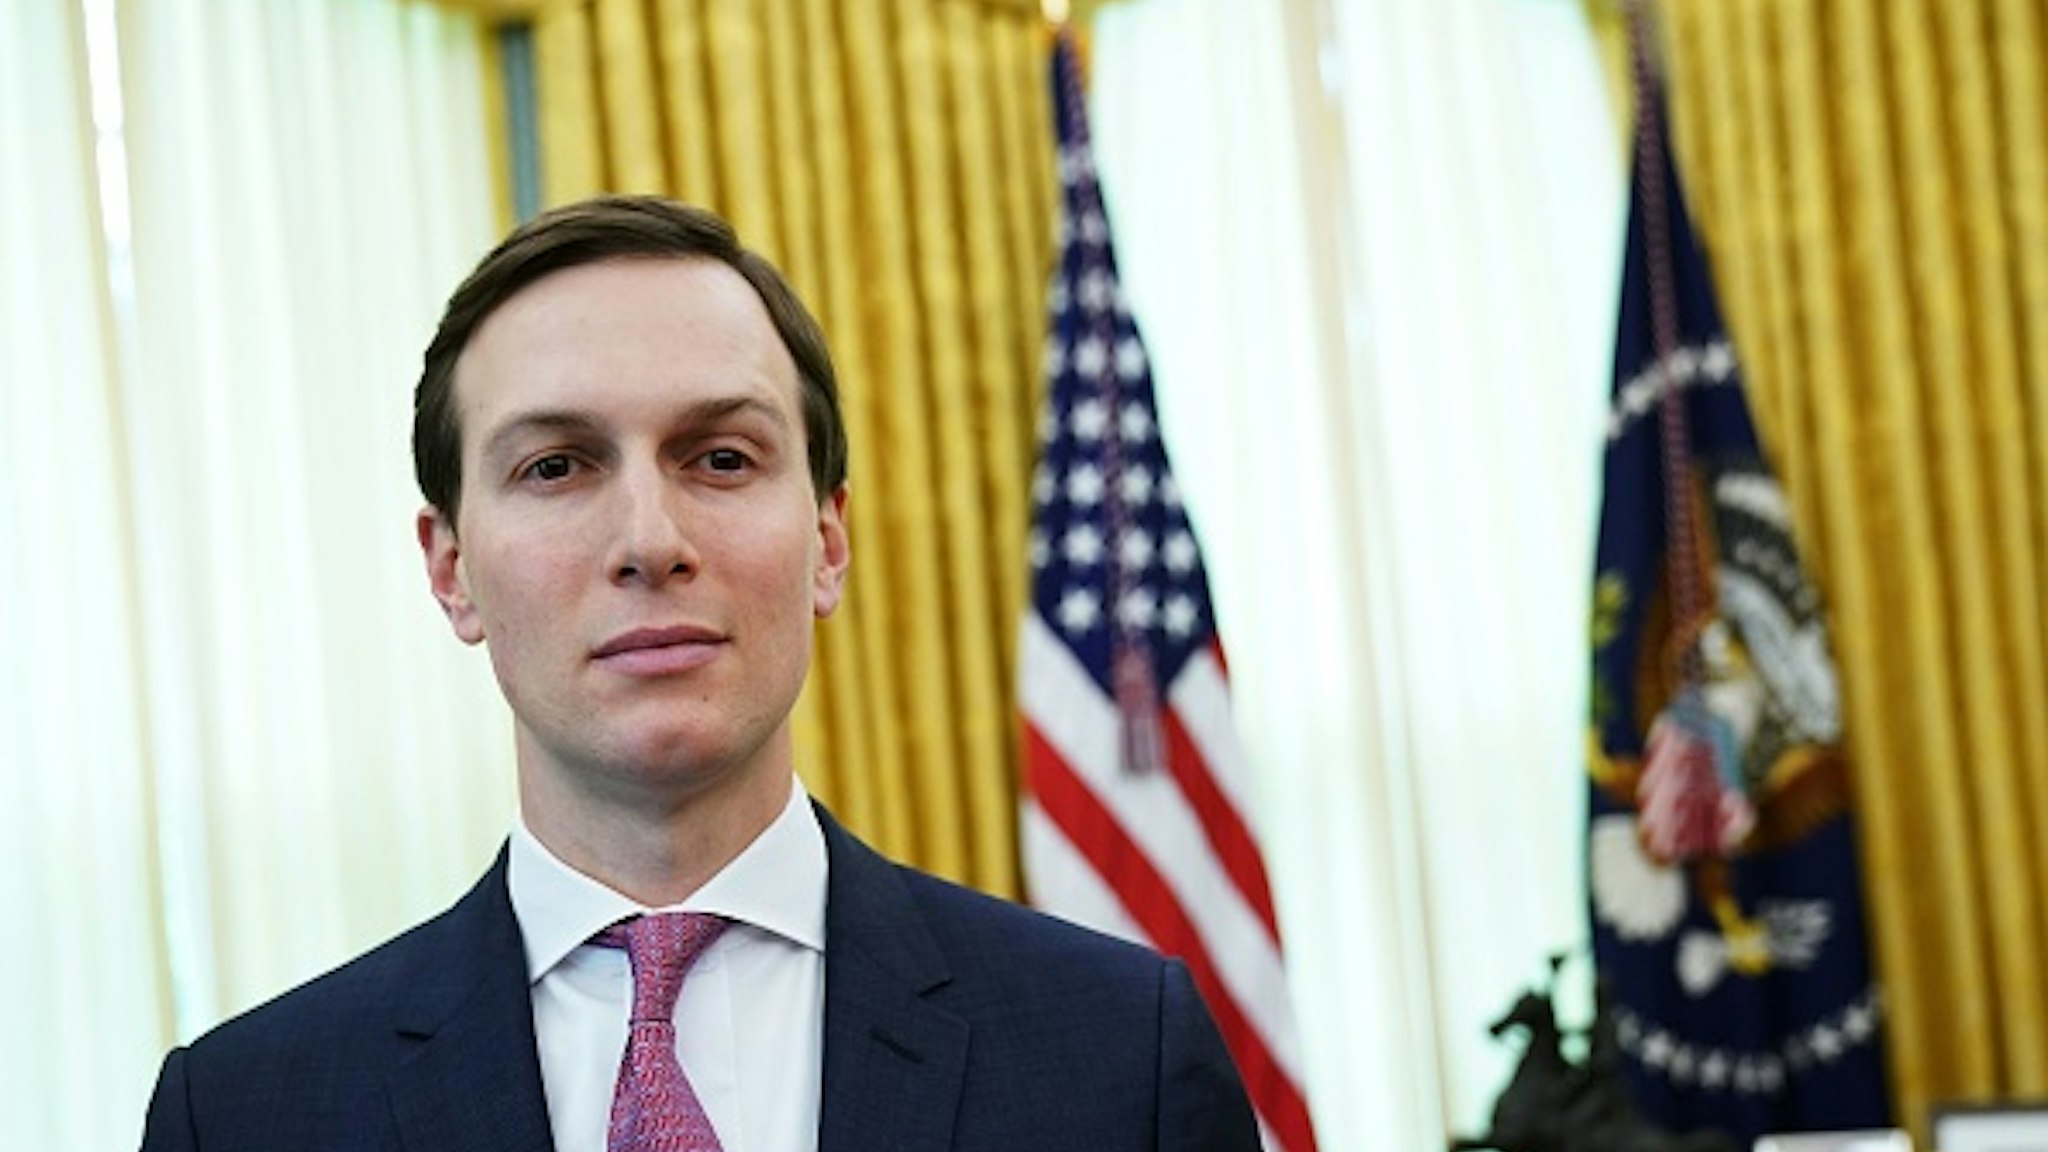 White House Senior Advisor Jared Kushner attends the meeting between US President Donald Trump and Florida Governor Ron DeSantis in the Oval Office of the White House in Washington, DC on April 28, 2020.